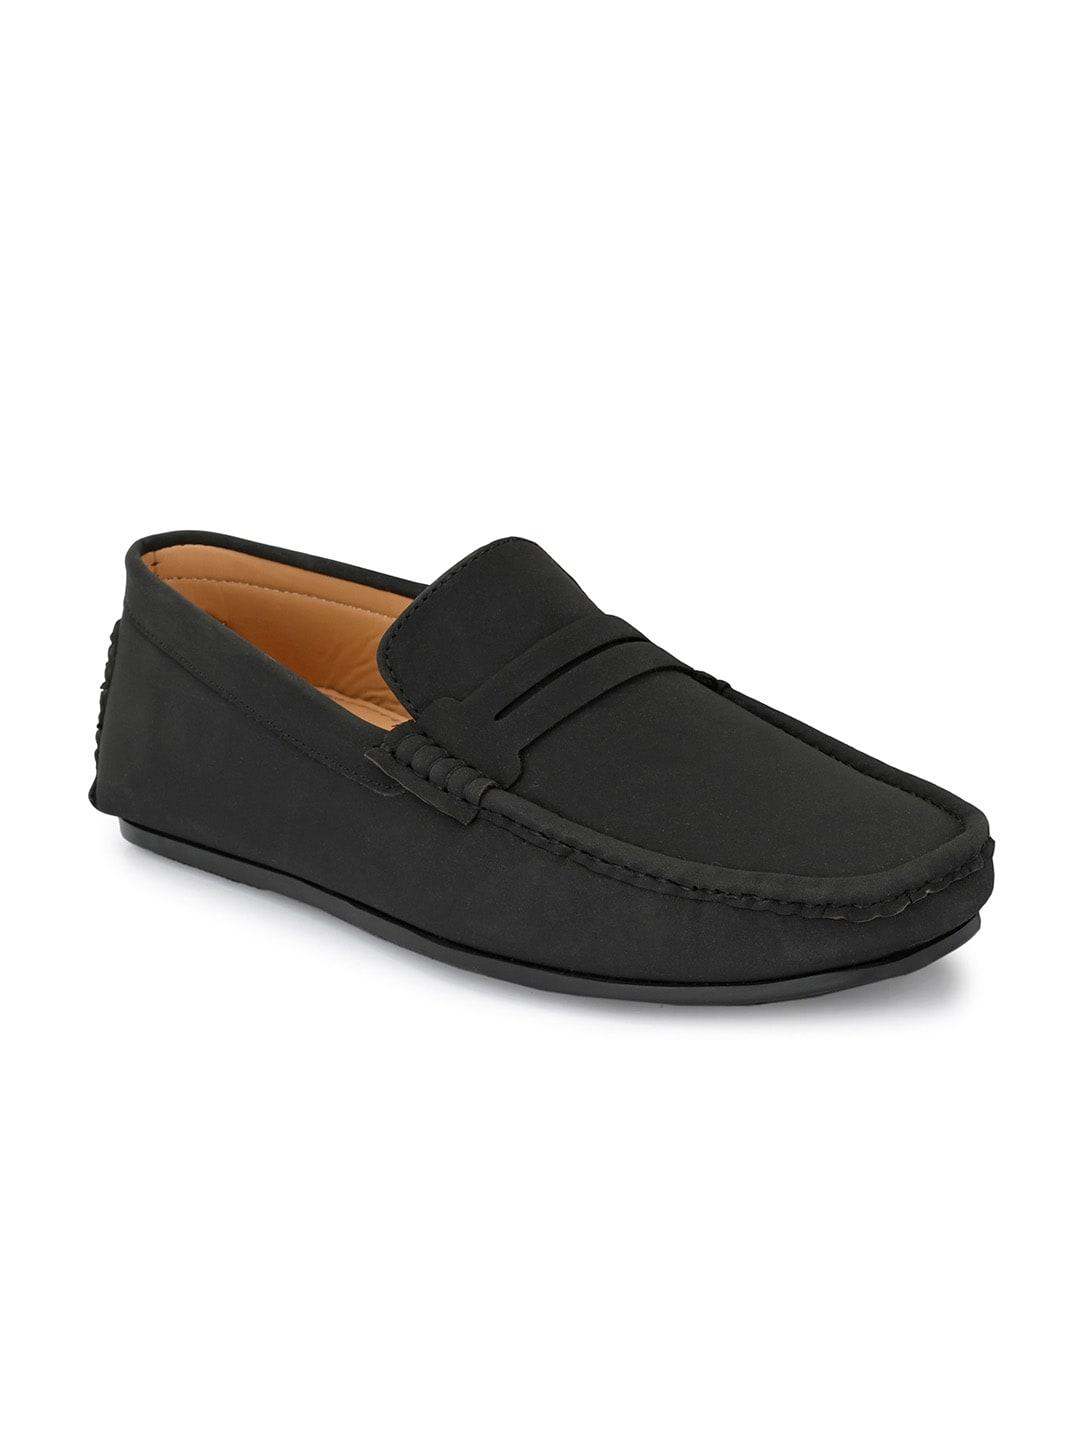 mast & harbour men lightweight casual loafers